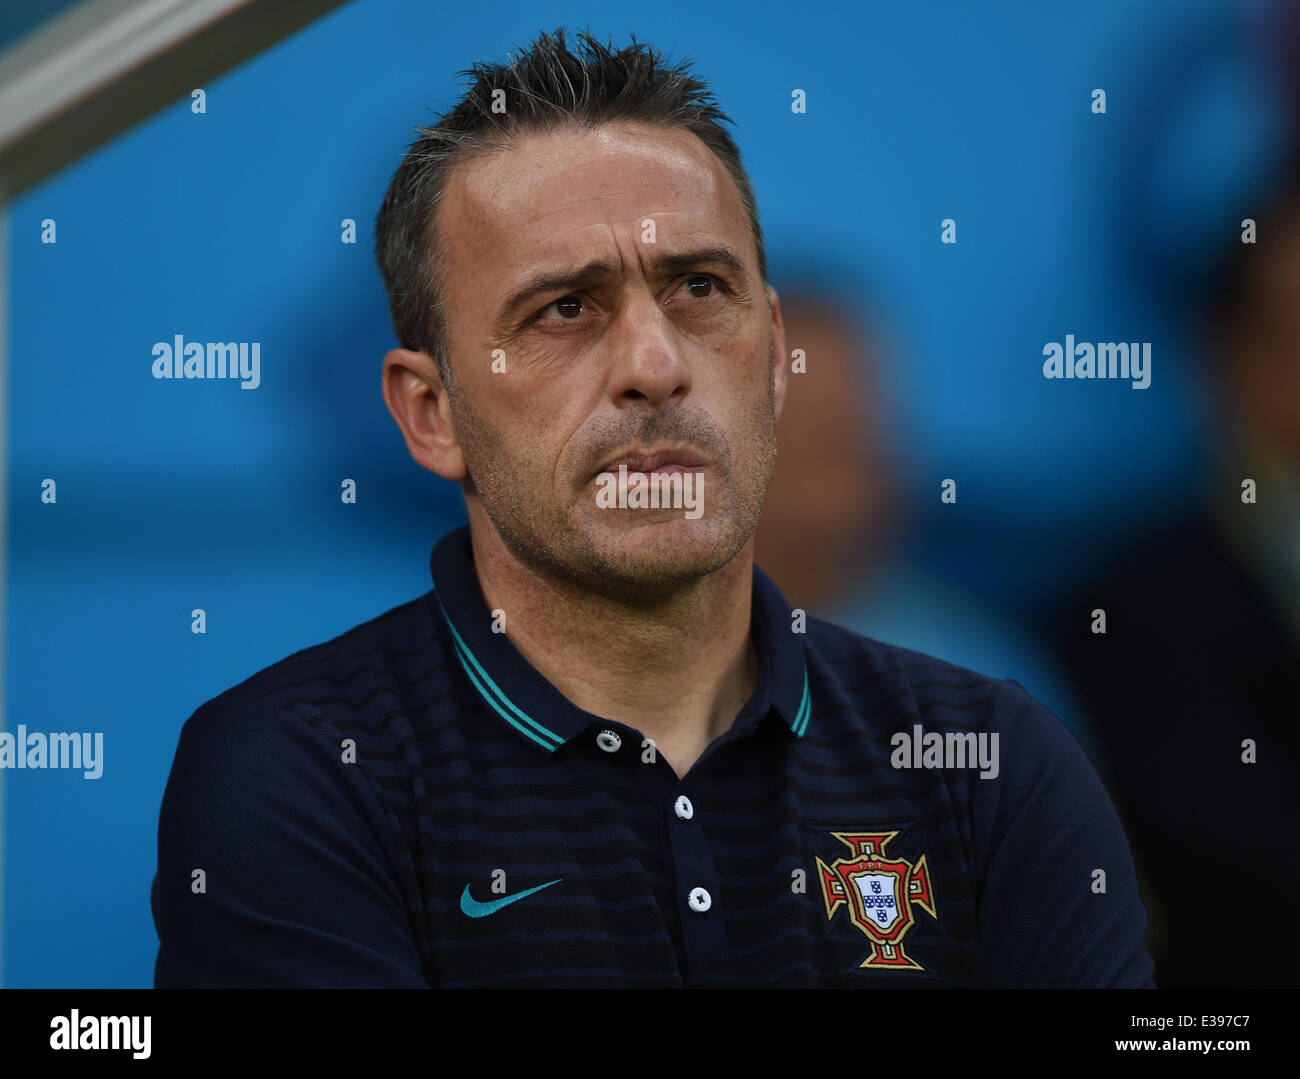 Manaus, Brazil. 22nd June, 2014. Head coach Paulo Bento of Portugal seen during the FIFA World Cup 2014 group G preliminary round match between the USA and Portugal at the Arena Amazonia Stadium in Manaus, Brazil, 22 June 2014. Photo: Marius Becker/dpa/Alamy Live News Stock Photo